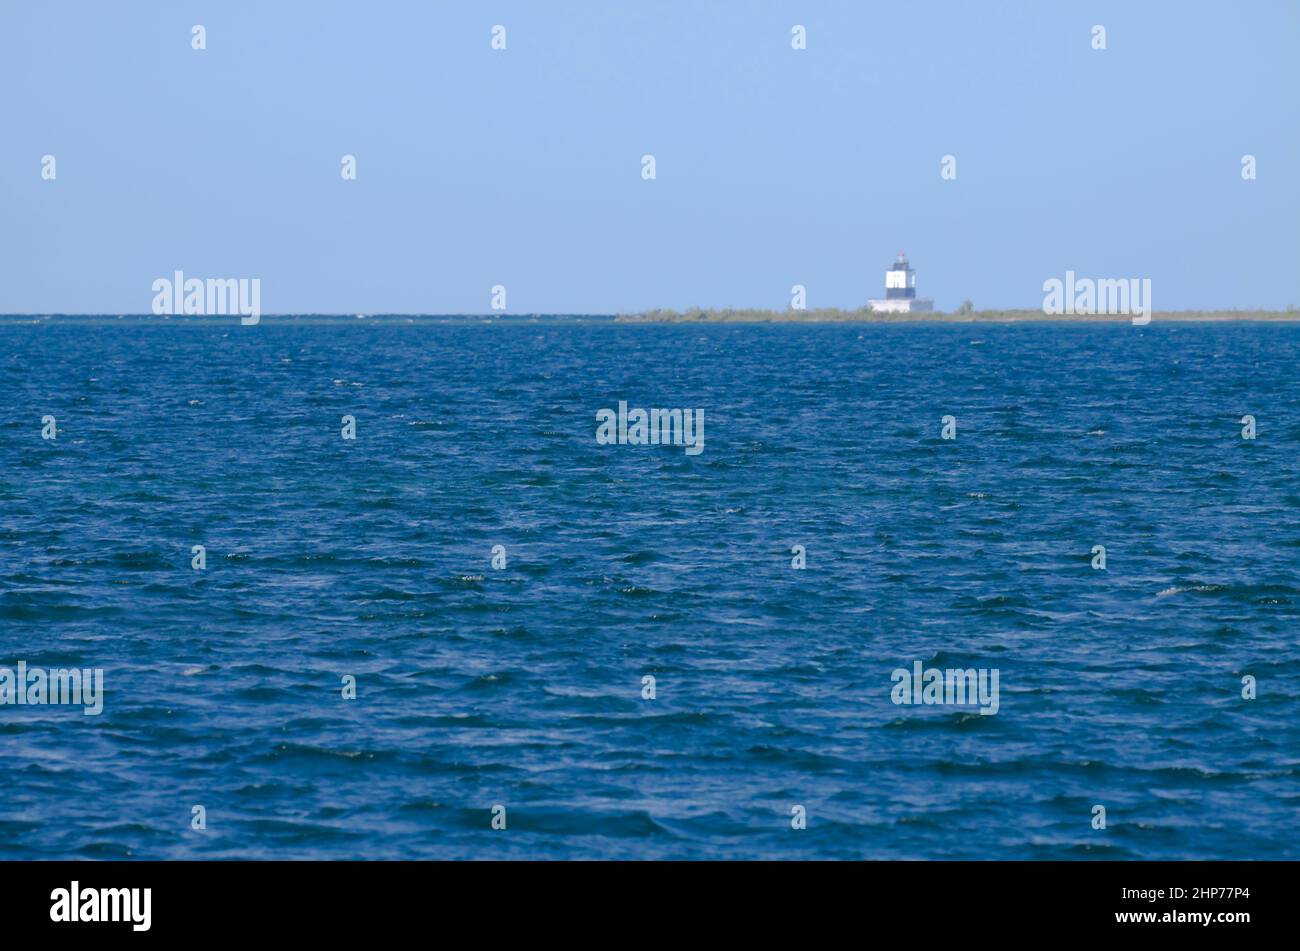 Poe Reef Lighthouse in the distance on Lake Huron. Stock Photo